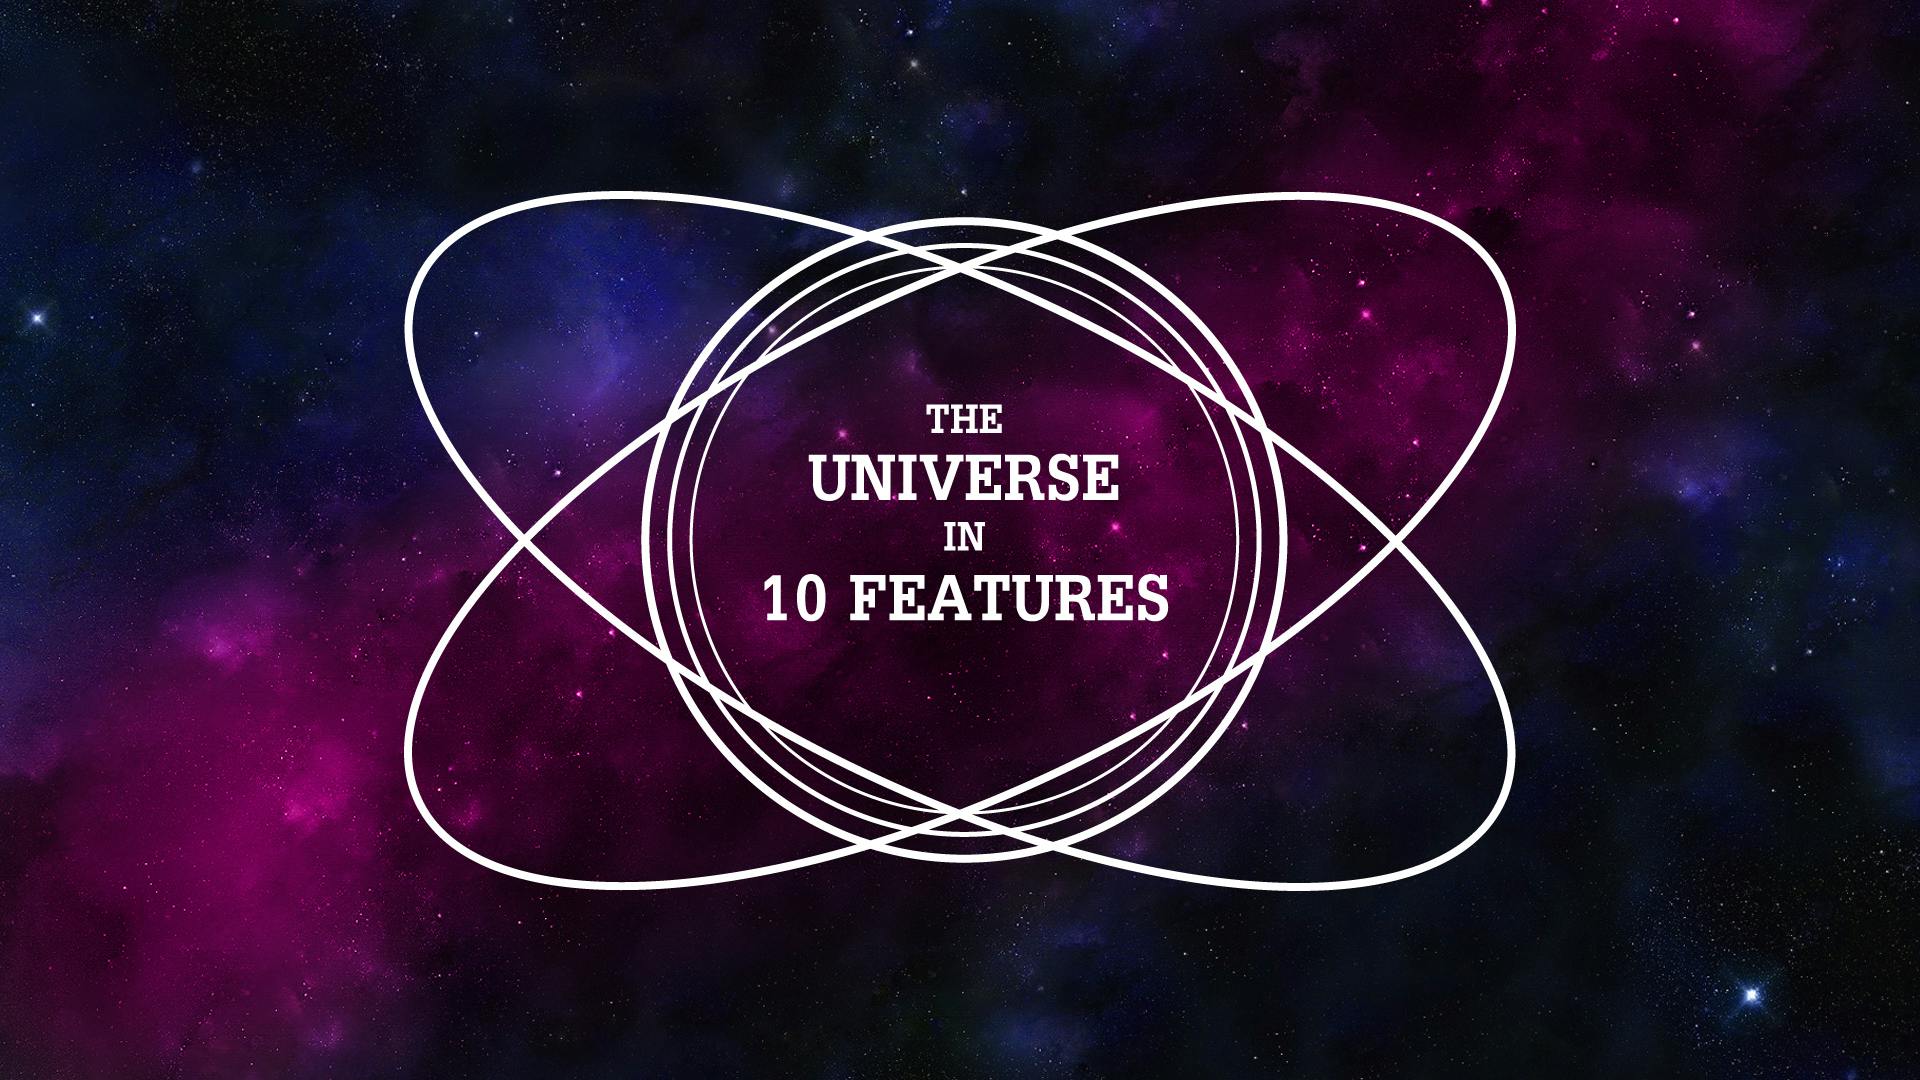 The Universe in 10 Features – 1. Cosmic Inflation